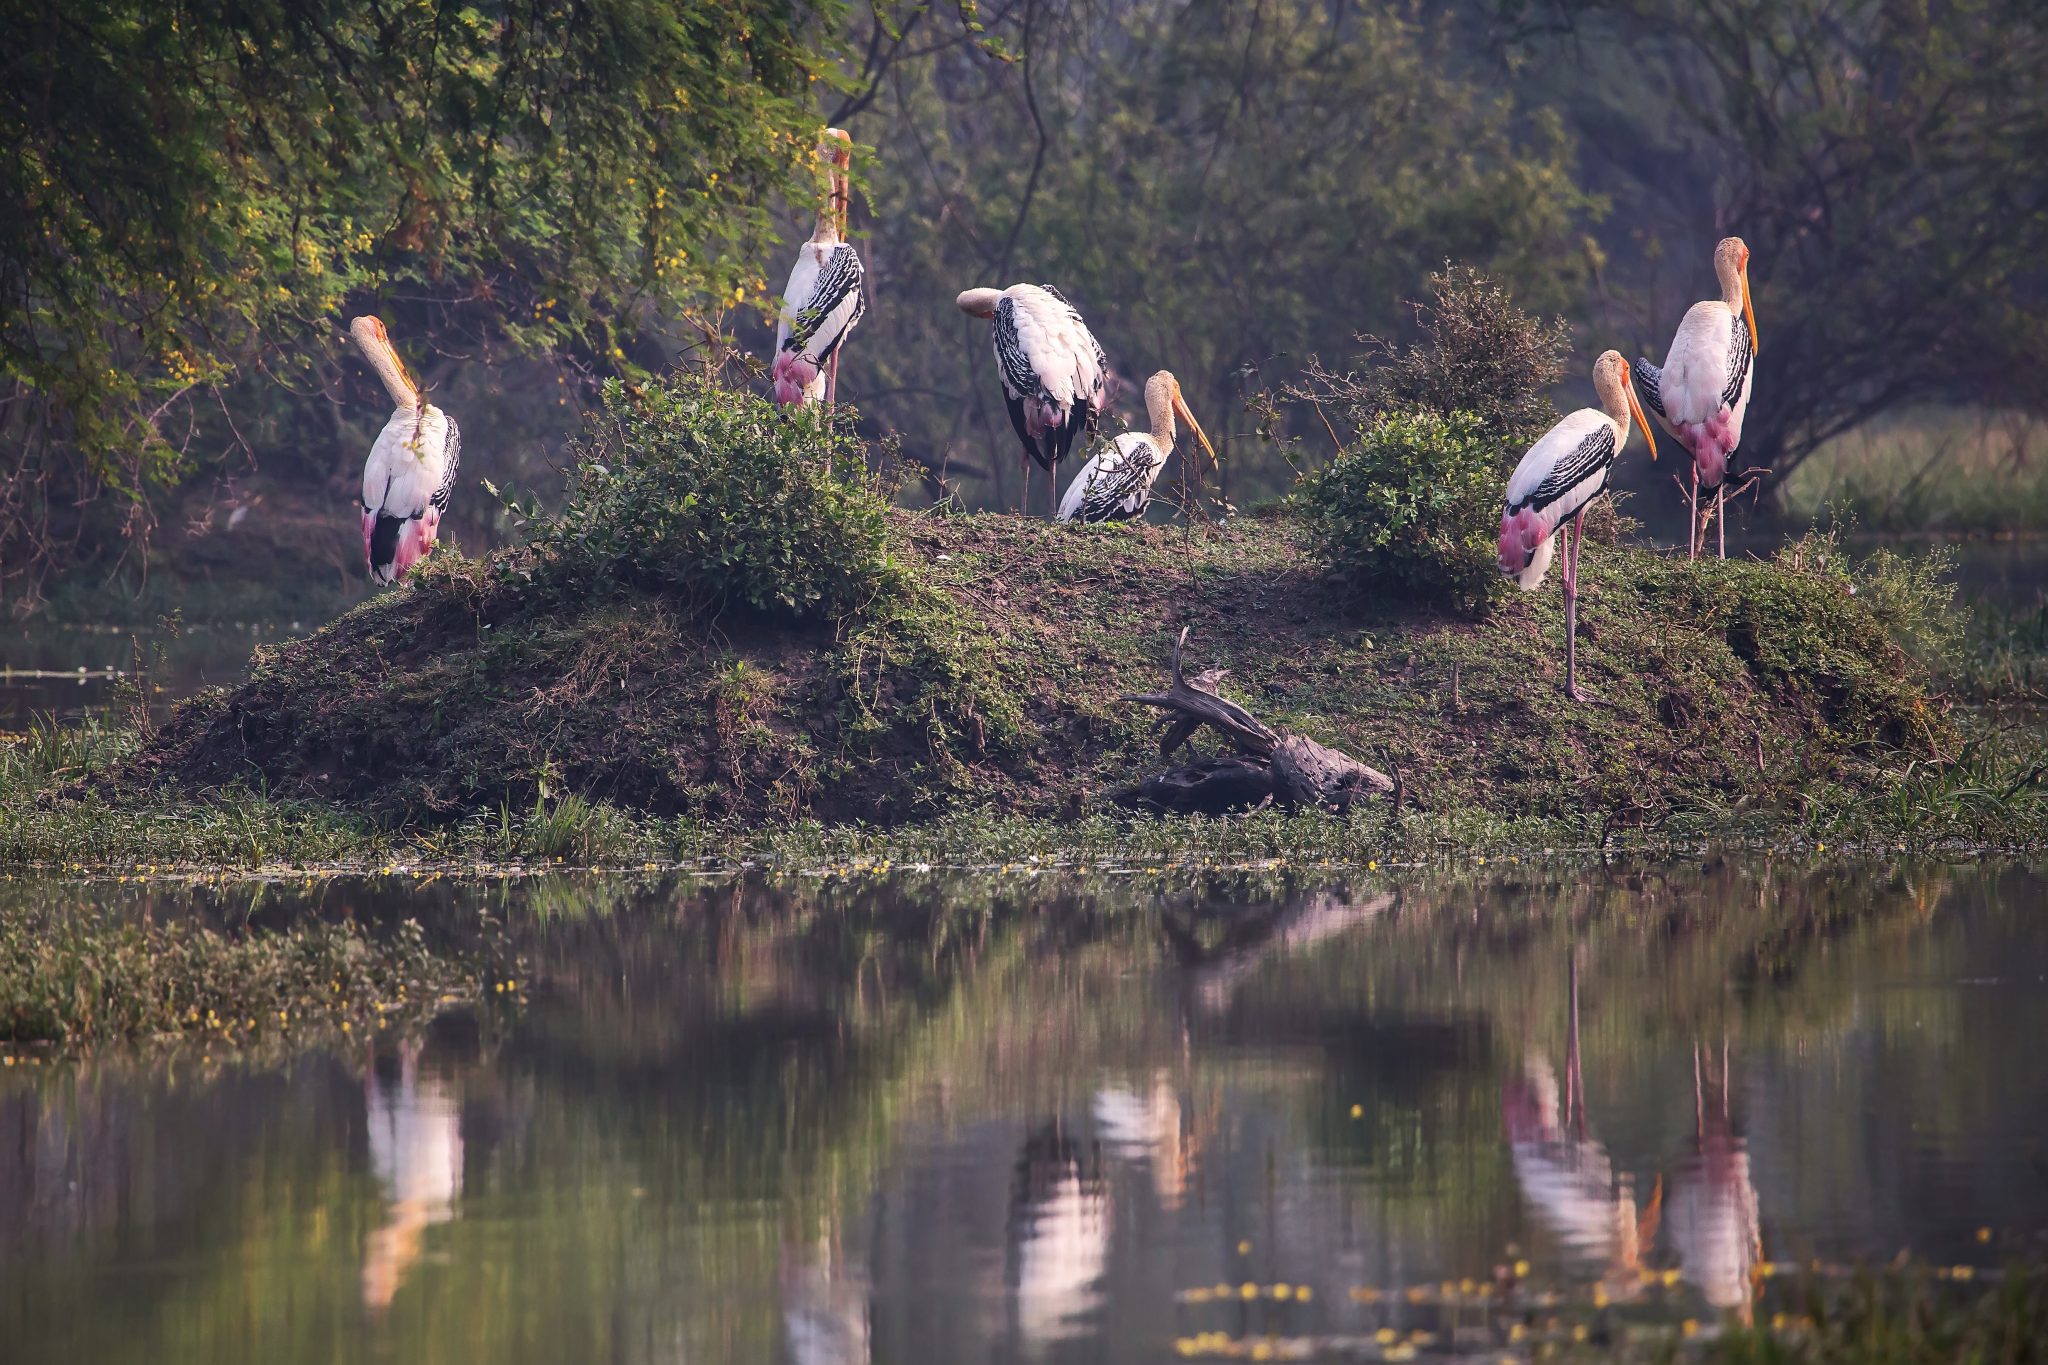 Why Keoladeo National Park is one of my favourite Indian nature reserves